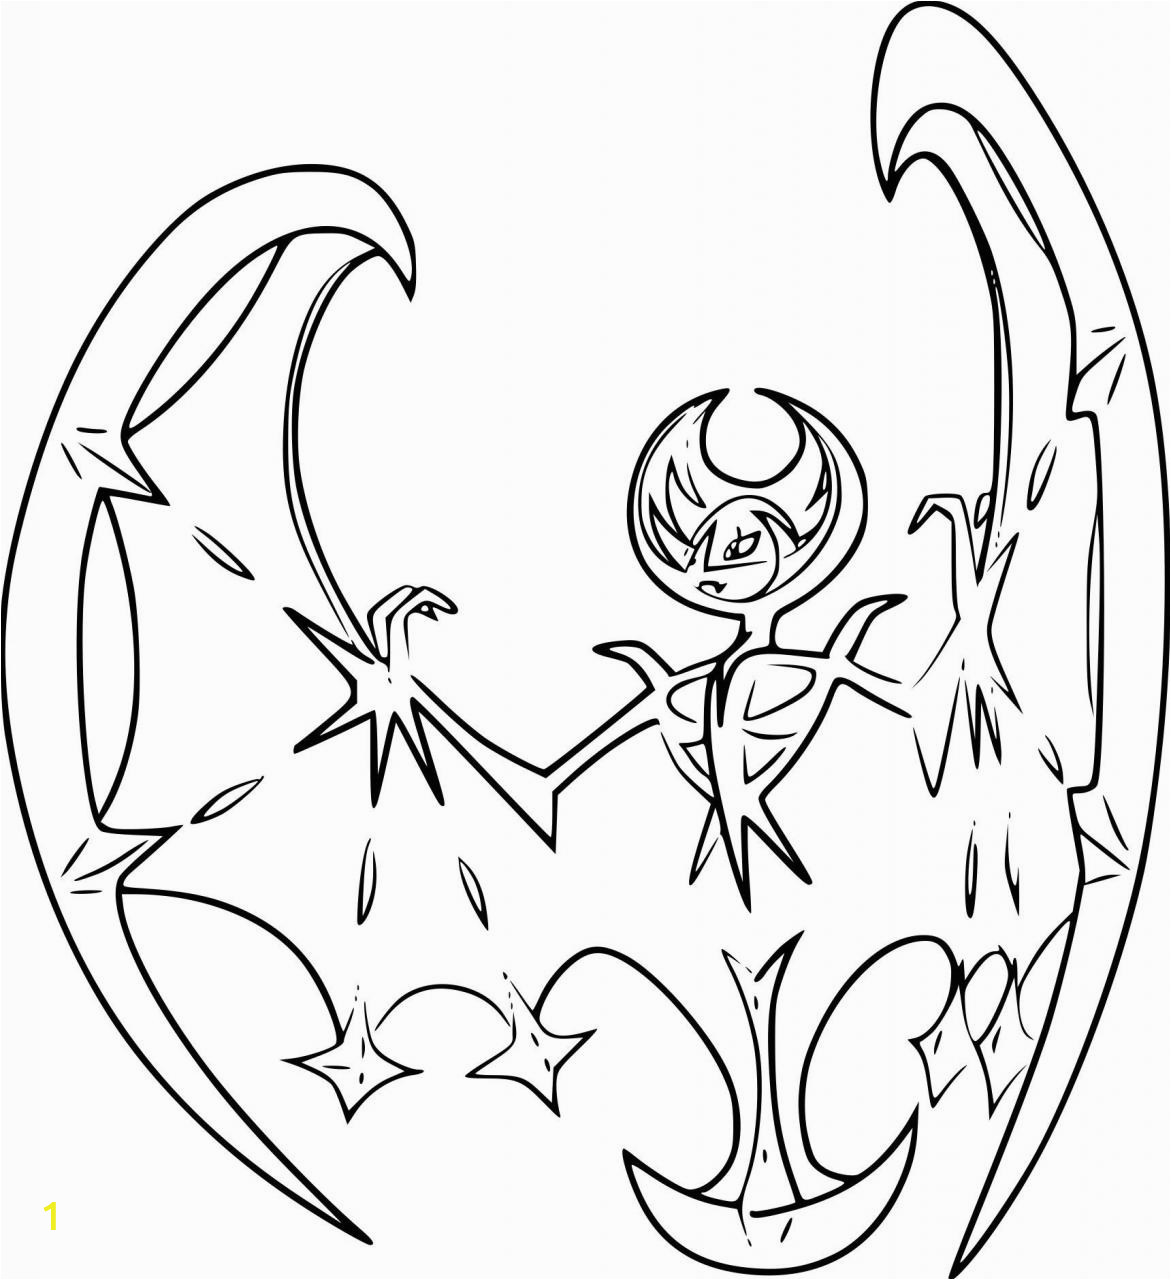 Sun and Moon Pokemon Coloring Pages Legendary Mega Sun and Moon Pokemon Coloring Pages